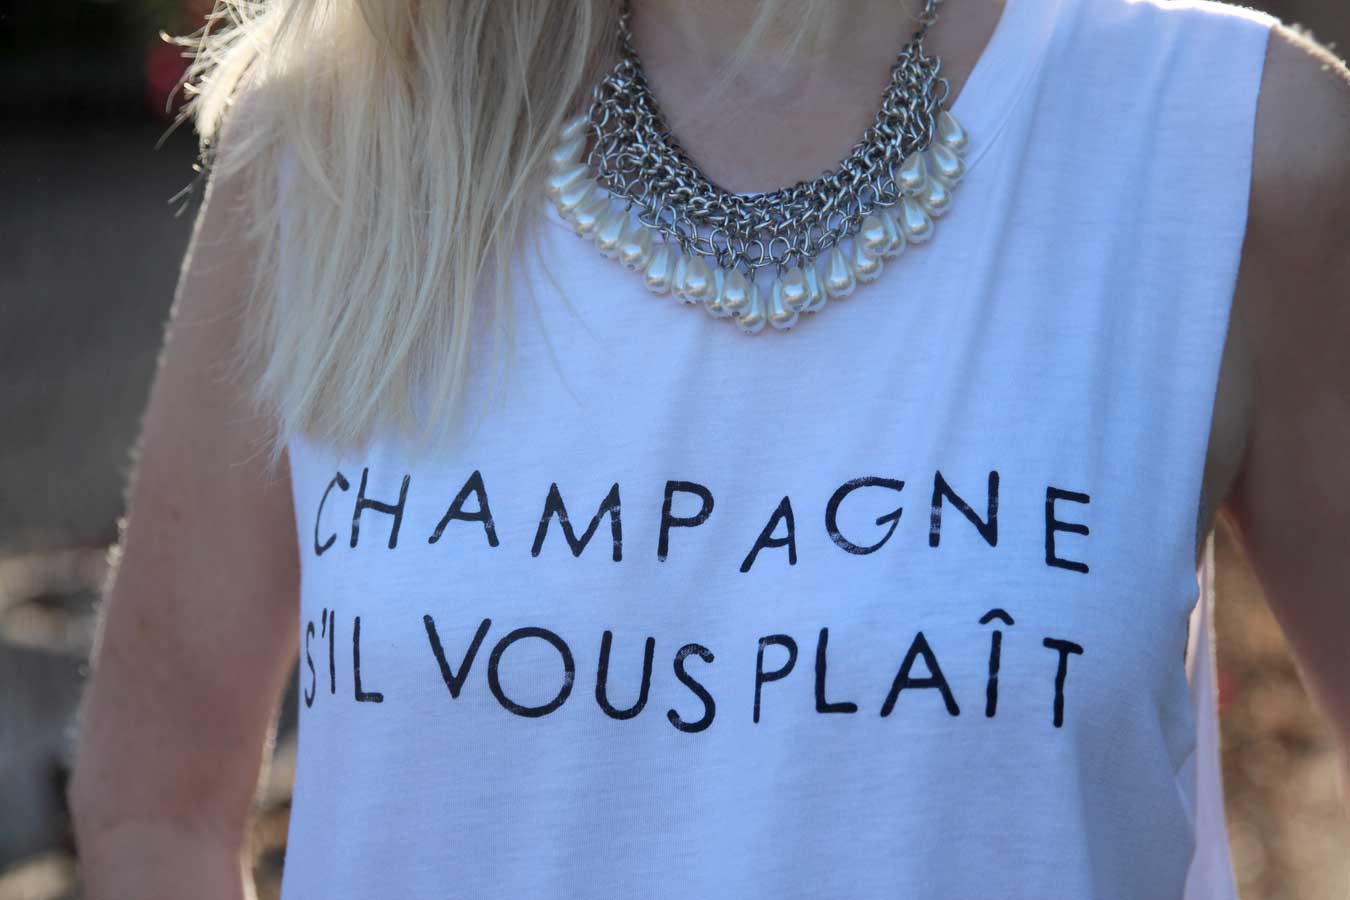 currently crushing, champagne sil vous plait t shirt, j crew distressed boyfriend jeans